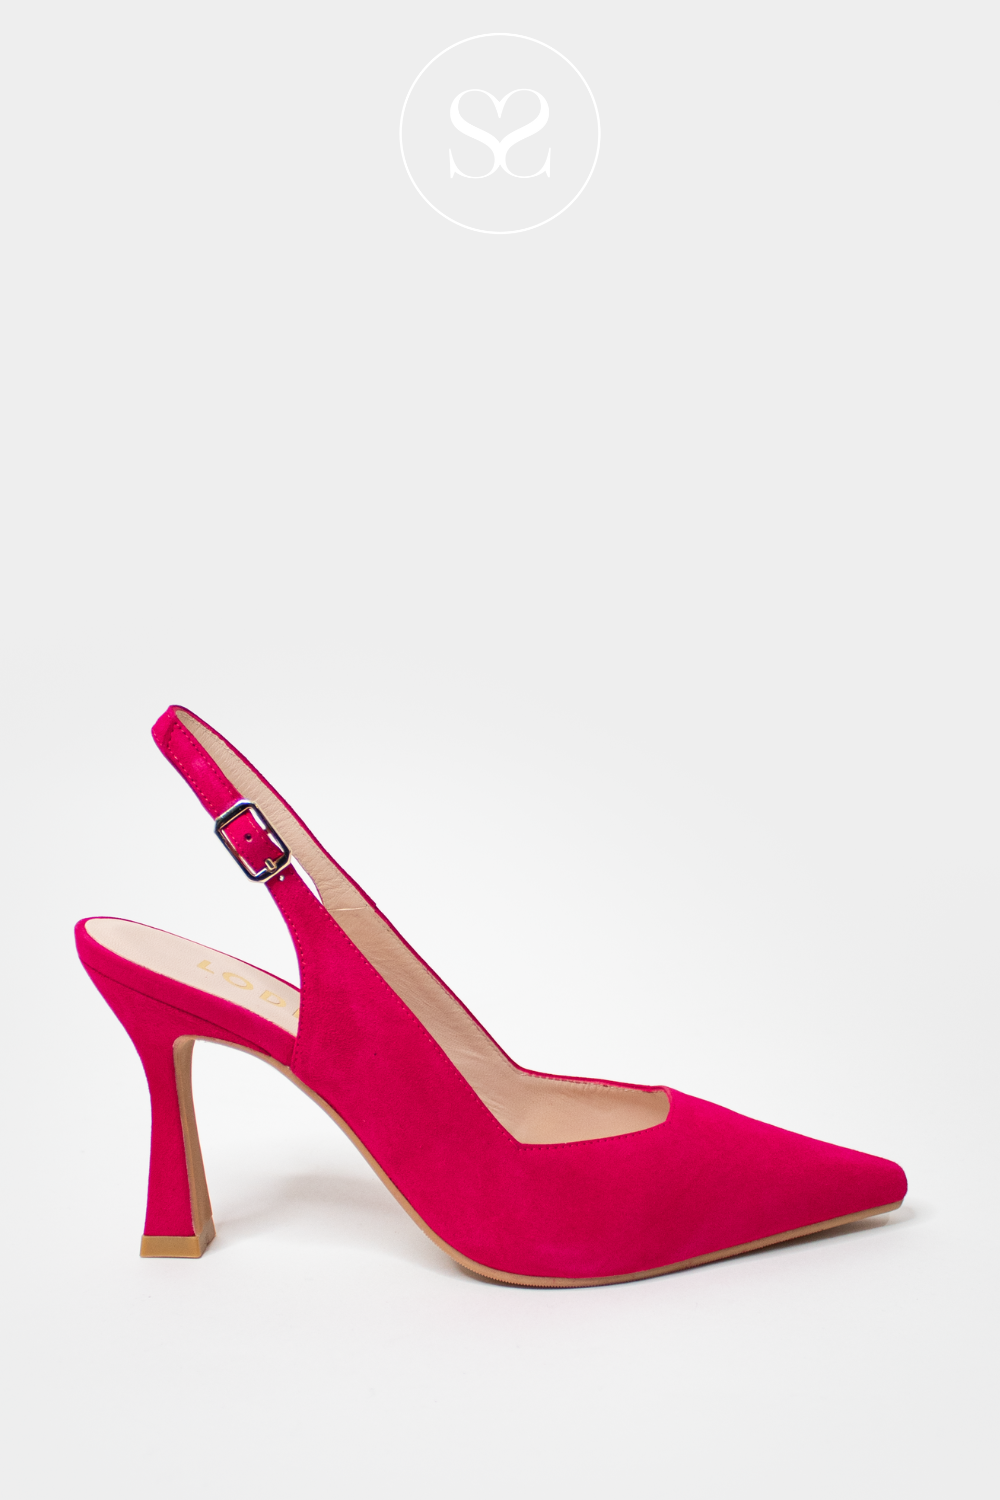 LODI MODERN PINK SUEDE POINTED TOE SLINGBACK HIGH HEEL WITH SCULPTED HEEL AND ADJUSTABLE ANKLE STRAP